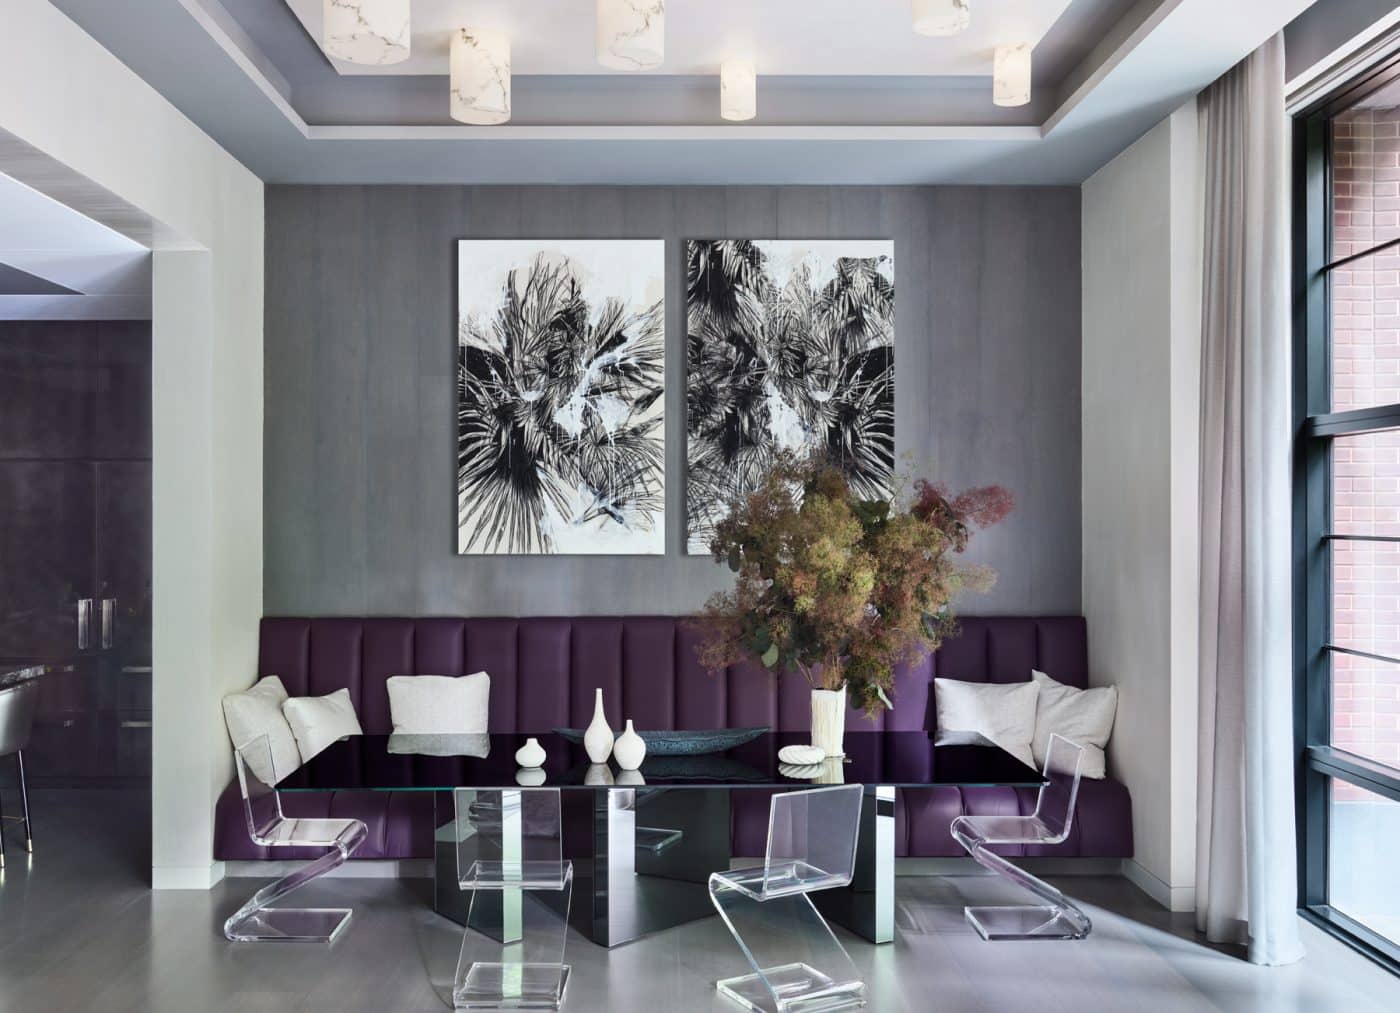 Dining area in maisonette project in New York City's West Village by interior designer Daun Curry